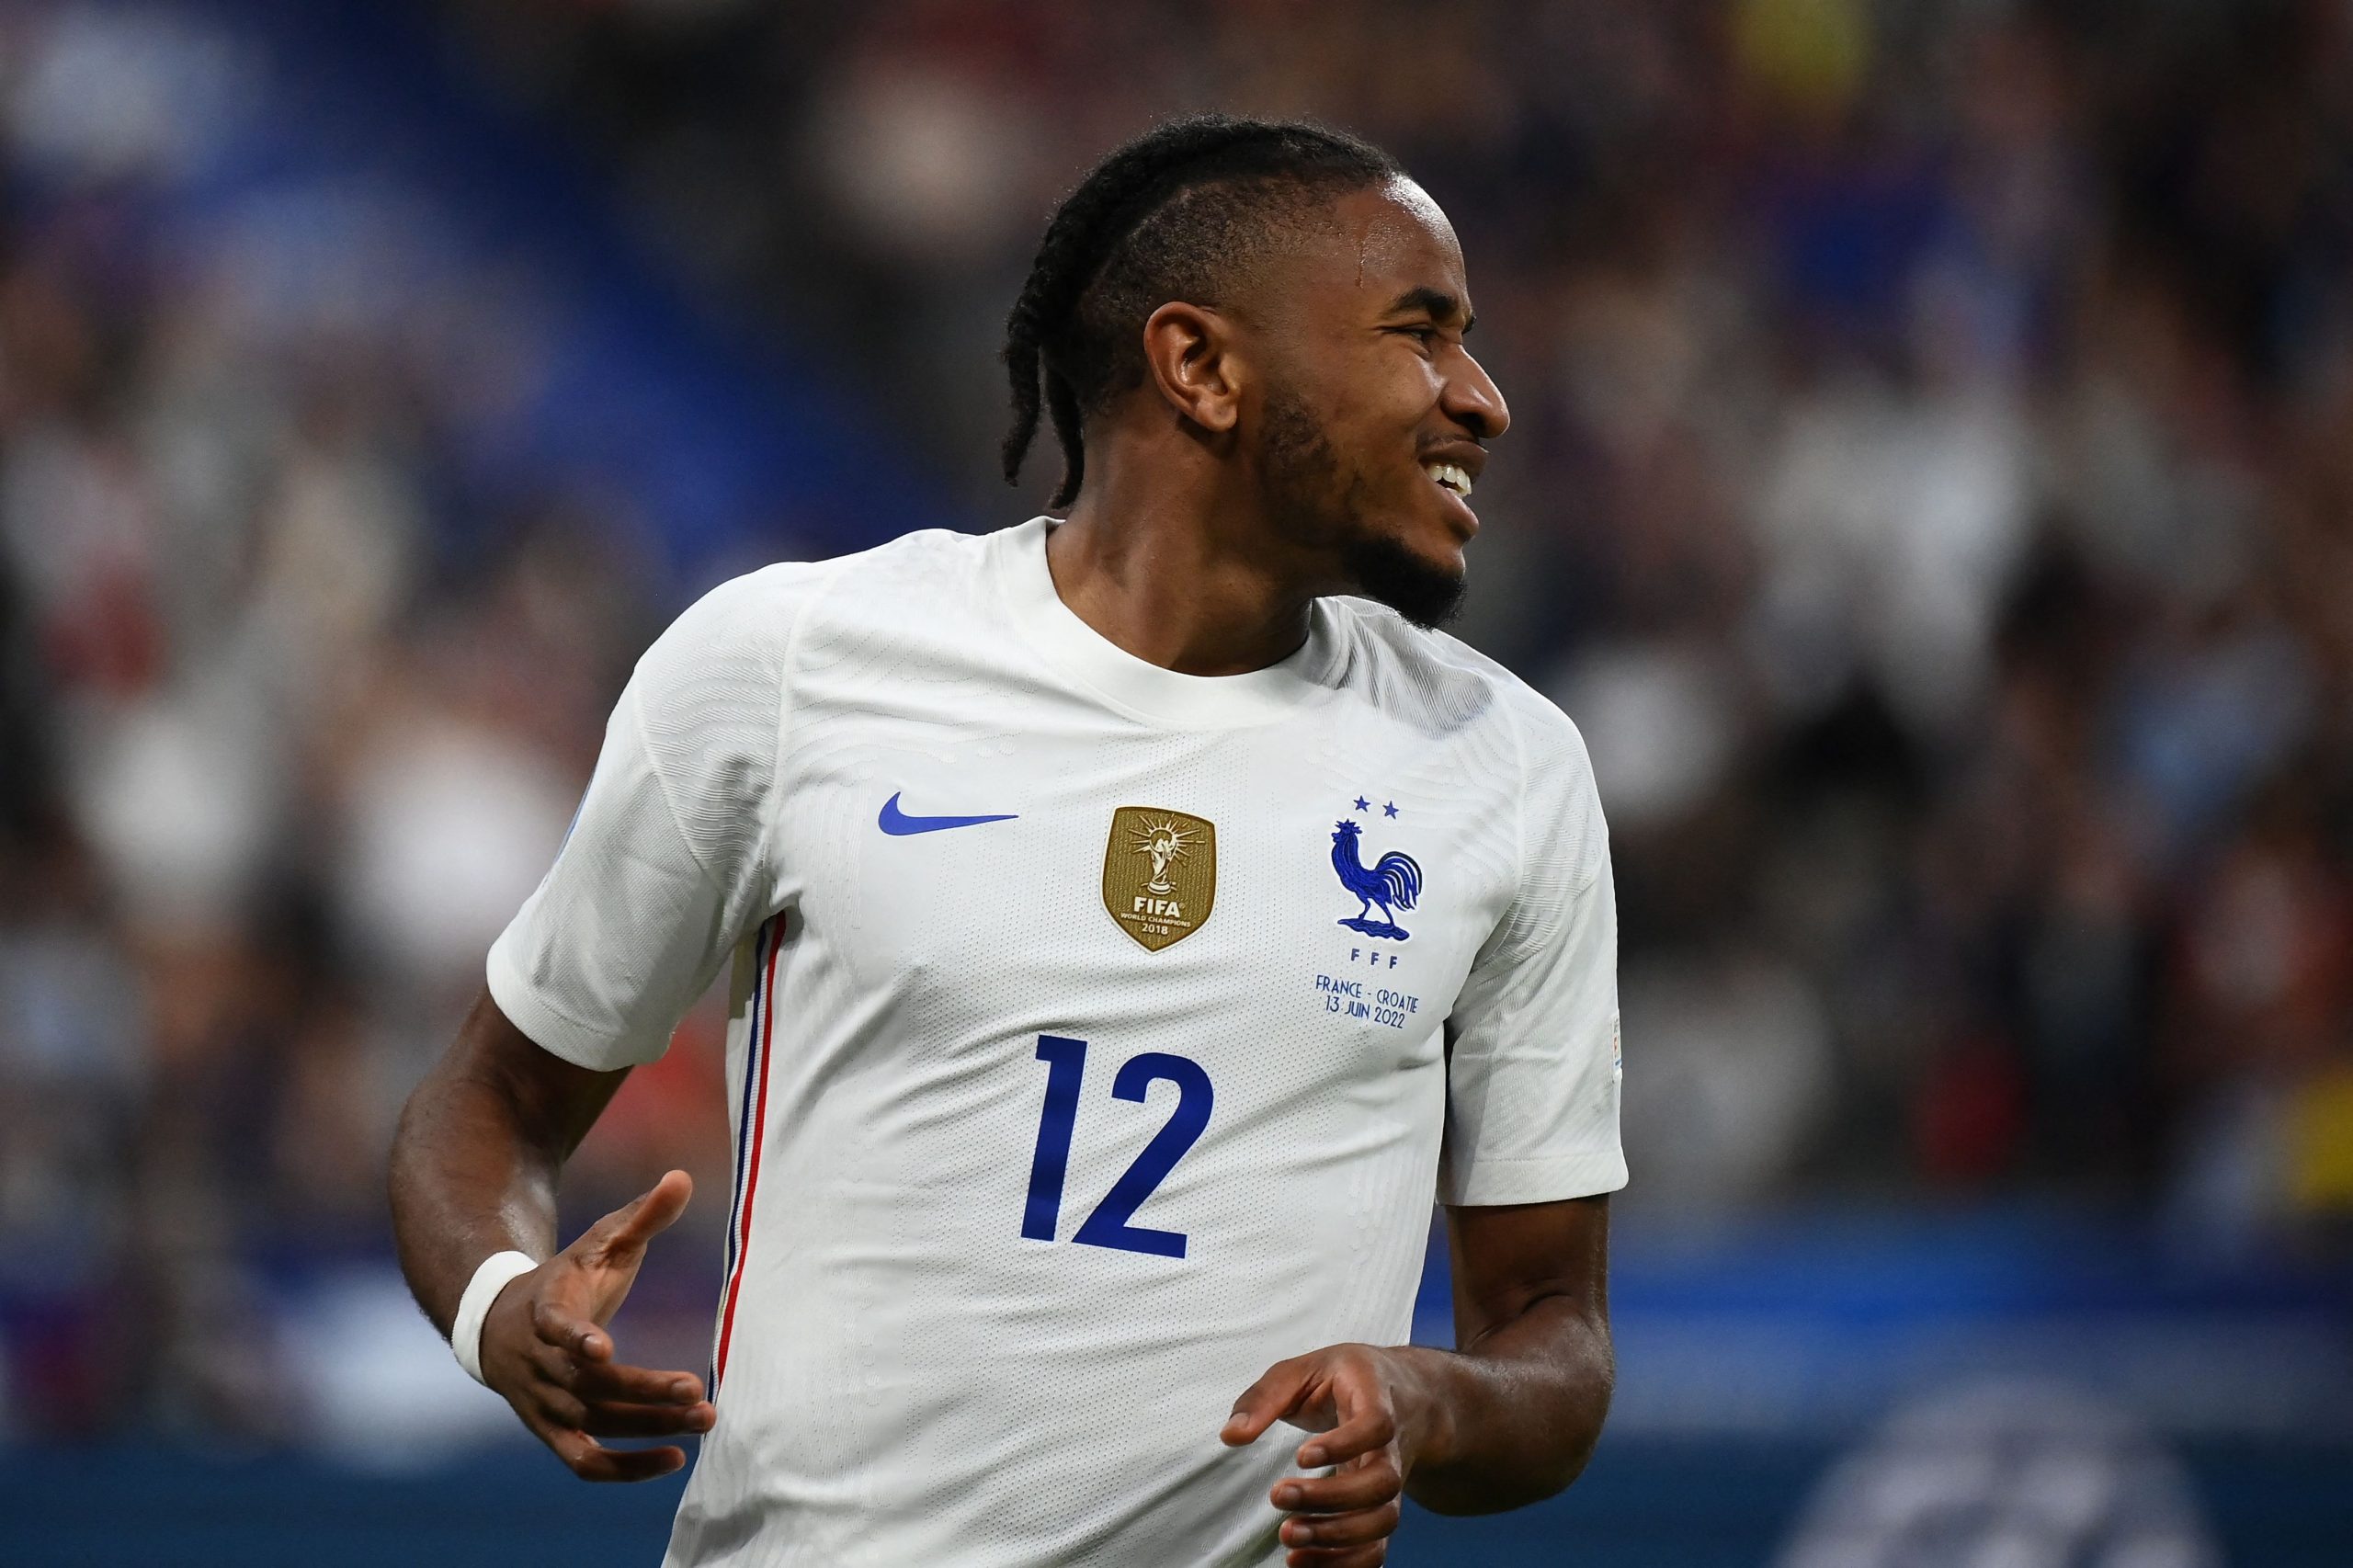 Christopher Nkunku has completed a £53m transfer to Chelsea amidst fears of the deal collapsing.